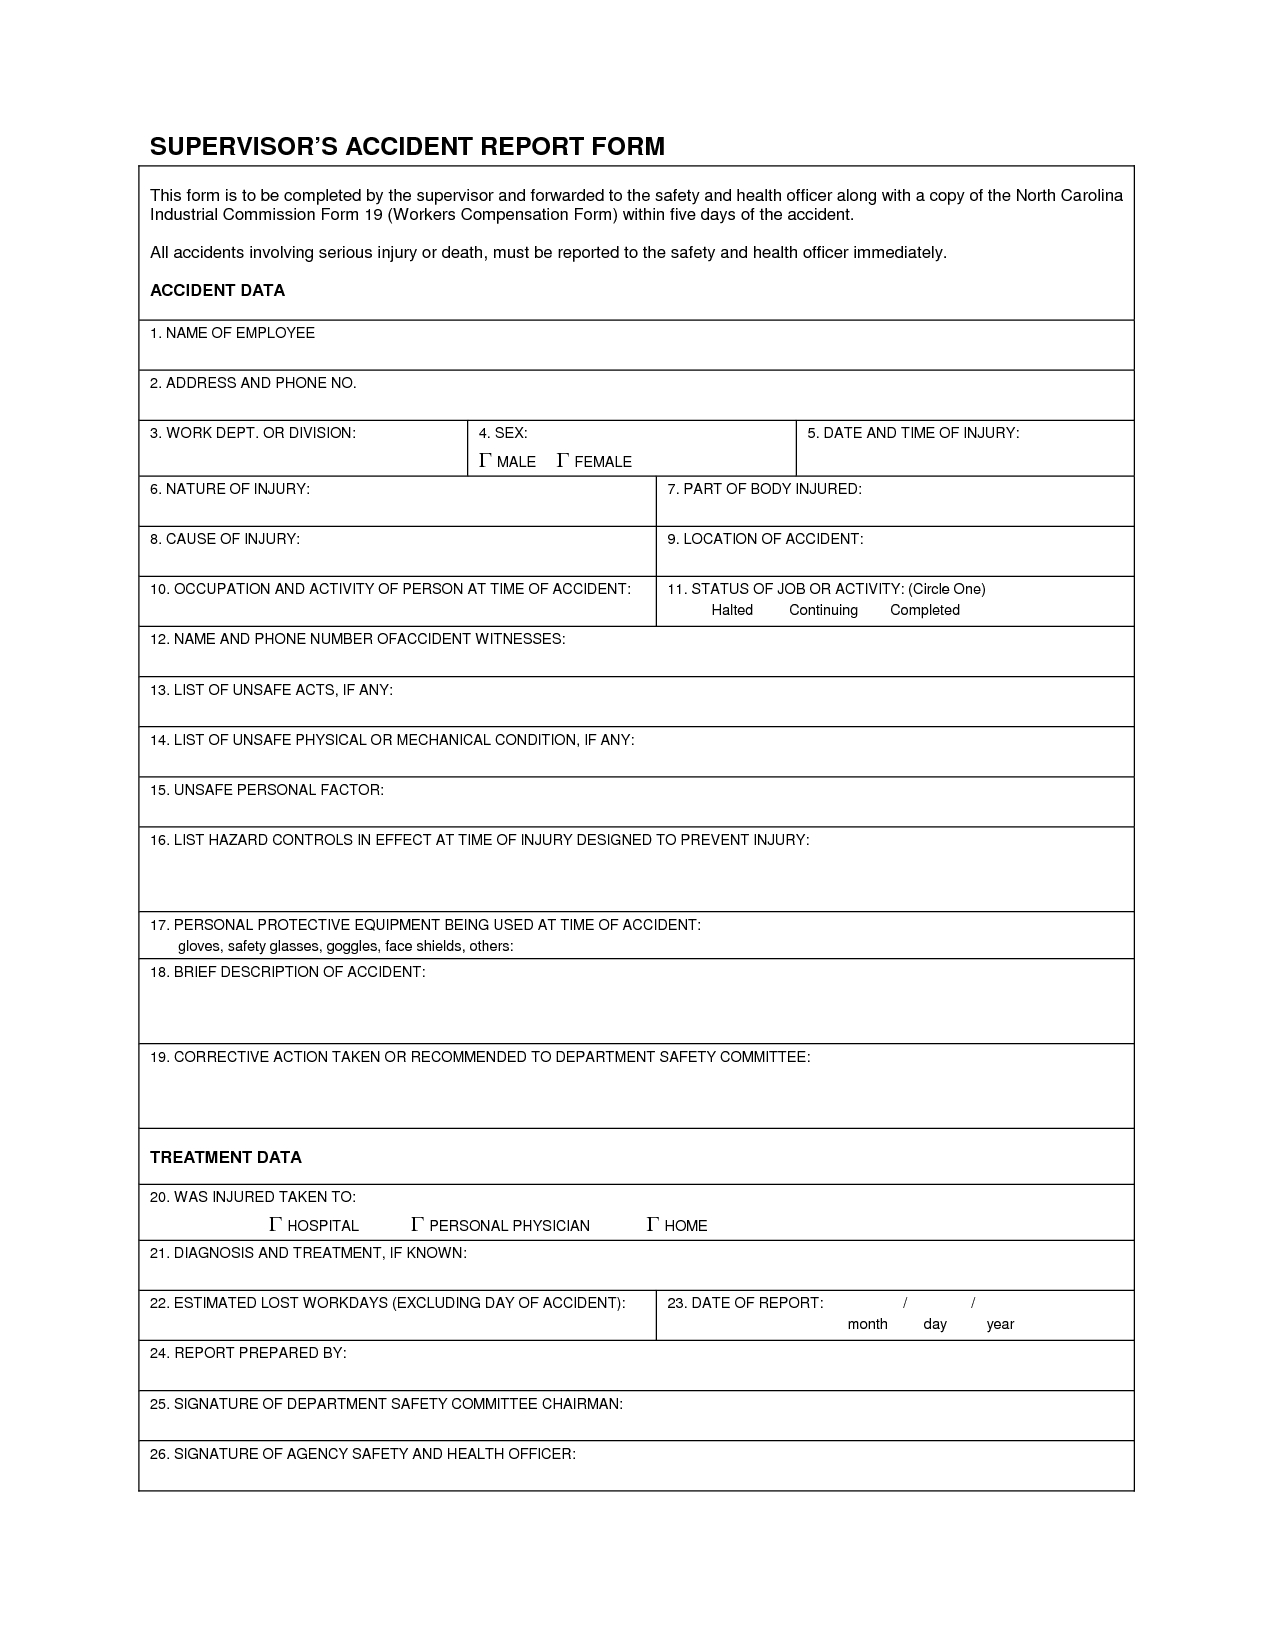 Industrial Accident Report Form Template | Supervisor's Throughout Hazard Incident Report Form Template